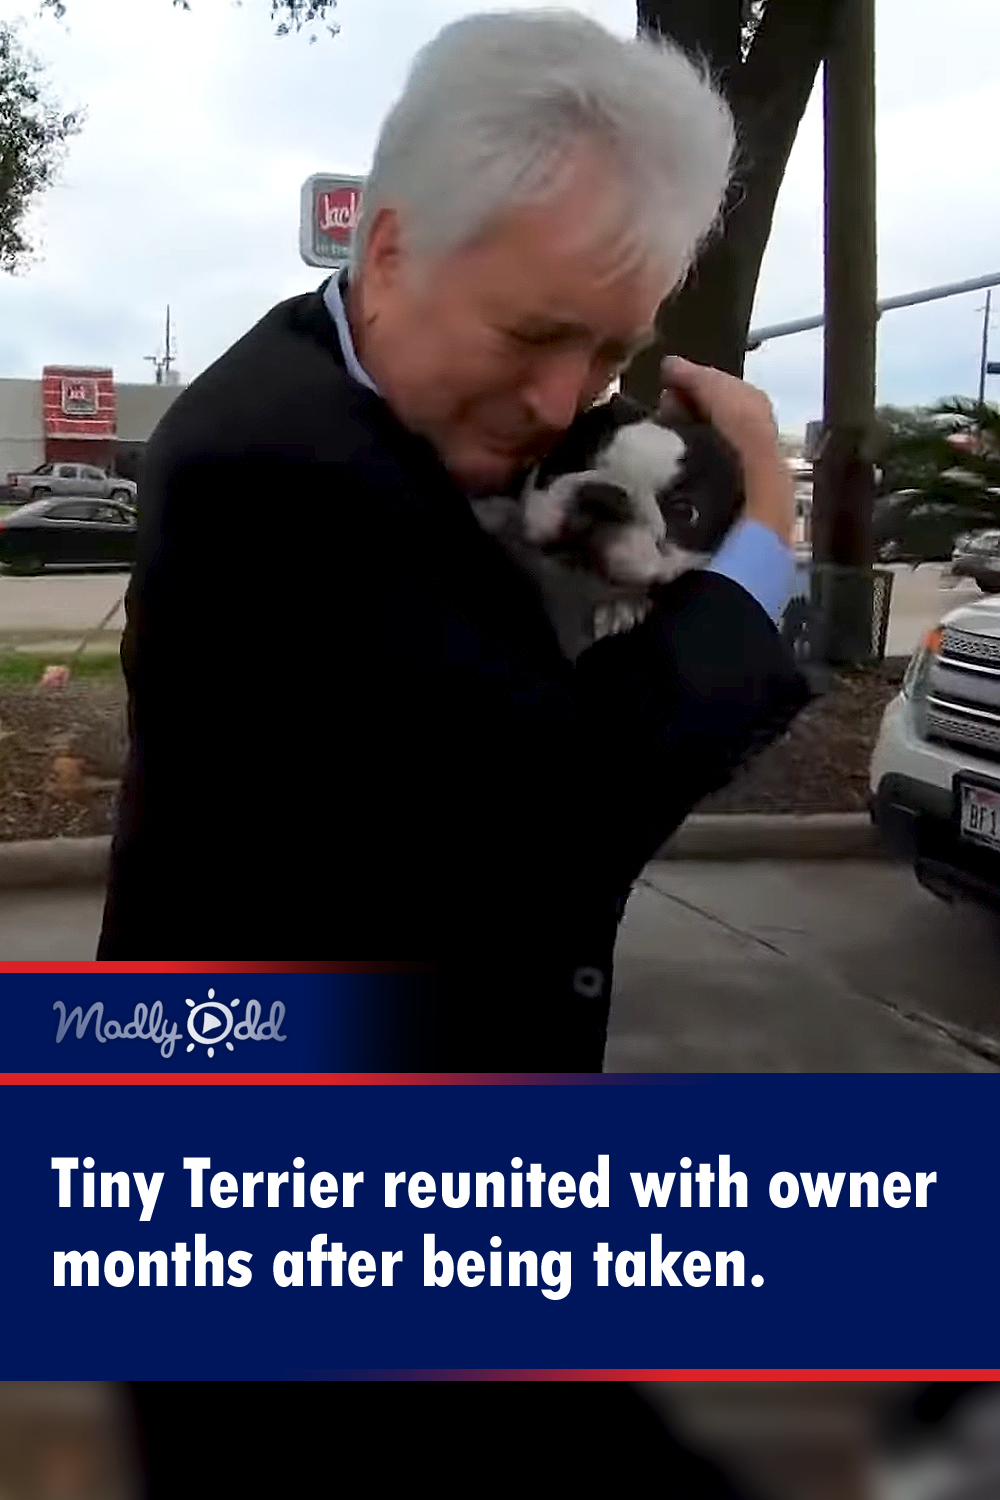 Tiny Terrier reunited with owner months after being taken